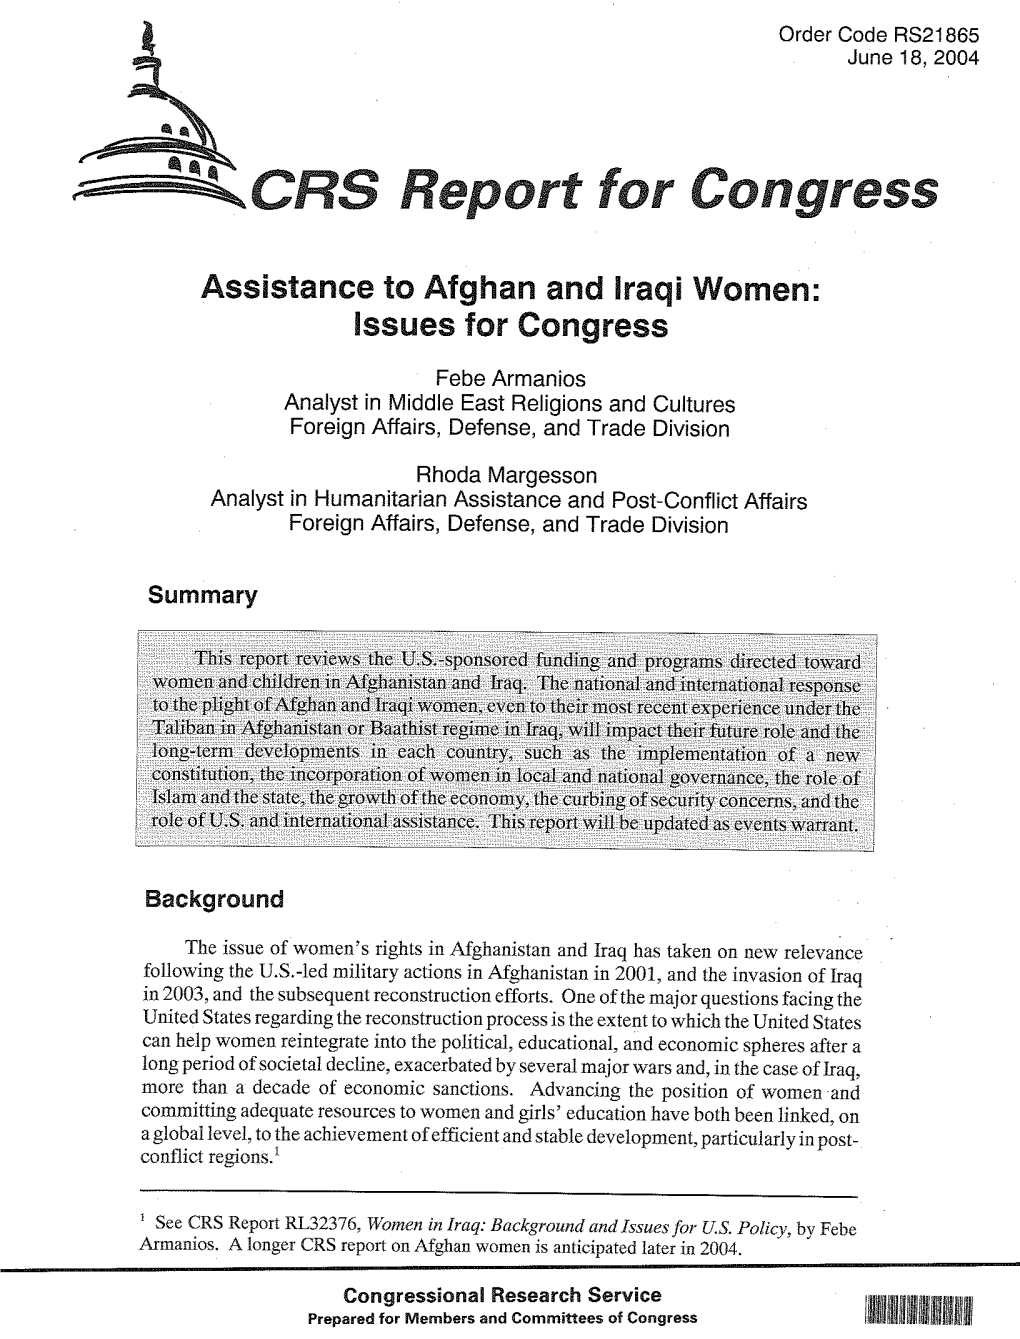 A Klkcrs Report for Conciress